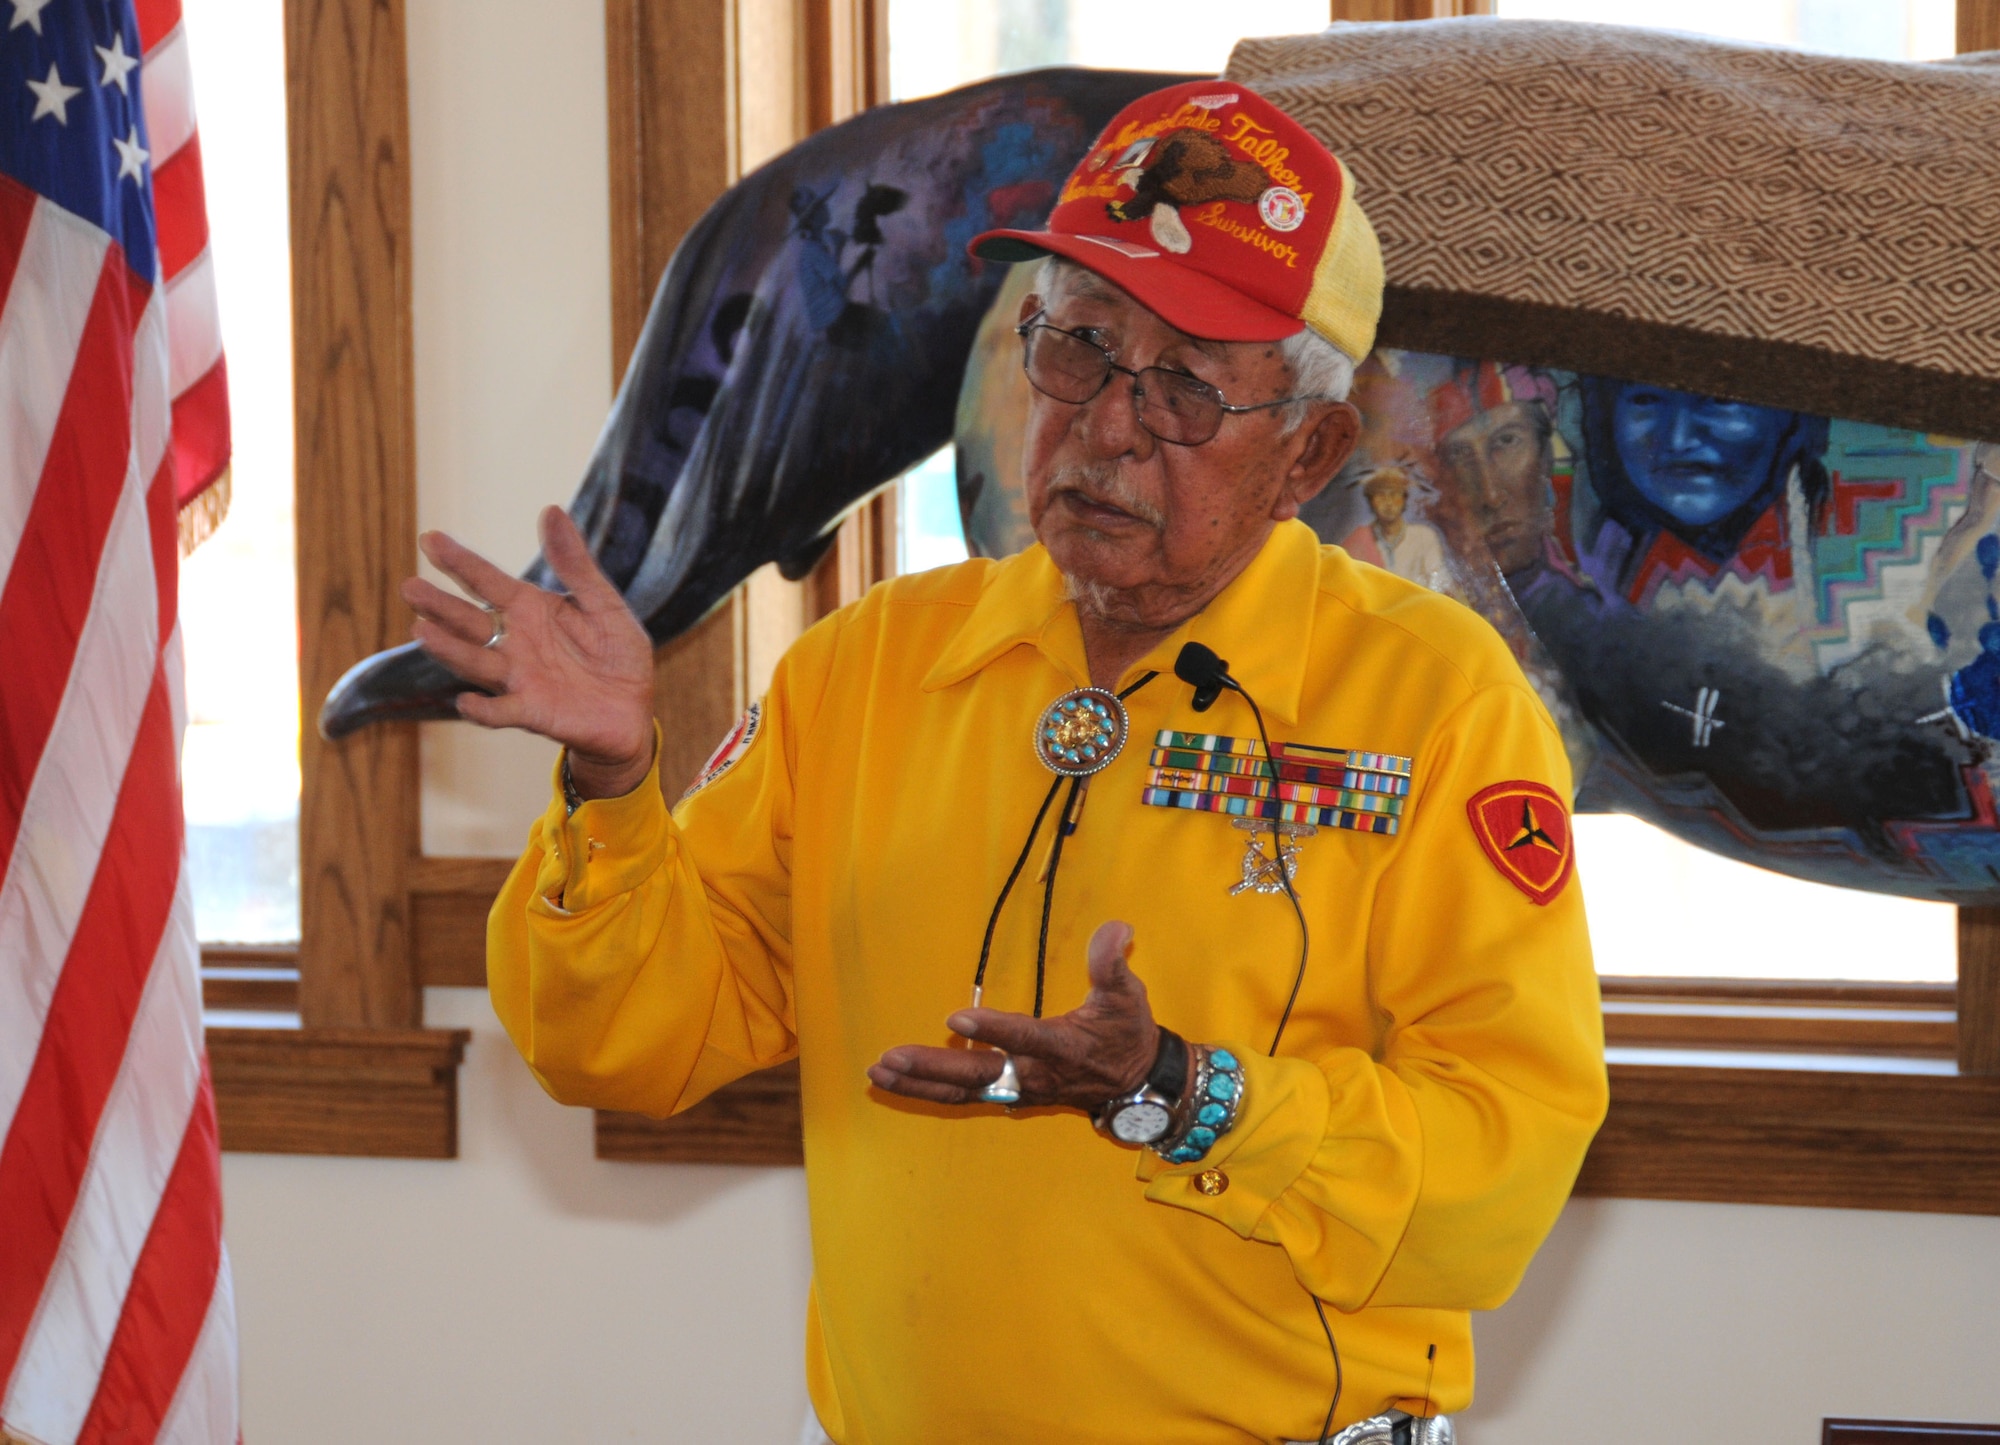 Bill Toledo, an original Navajo "Code-Talker" from World War II, speaks about his experiences during the war, to members of the 113th Civil Engineer Squadron (113 CES), District of Columbia Air National Guard, in Gallup, N.M., June 2, 2011.  The 113th CES members are in Gallup and Window Rock, Ariz., as part of the Innovative Readiness Training, a civil-military affairs program linking military units with civilian communities for humanitarian projects.  (U.S. Air Force Photo by Tech Sgt. Craig Clapper)   